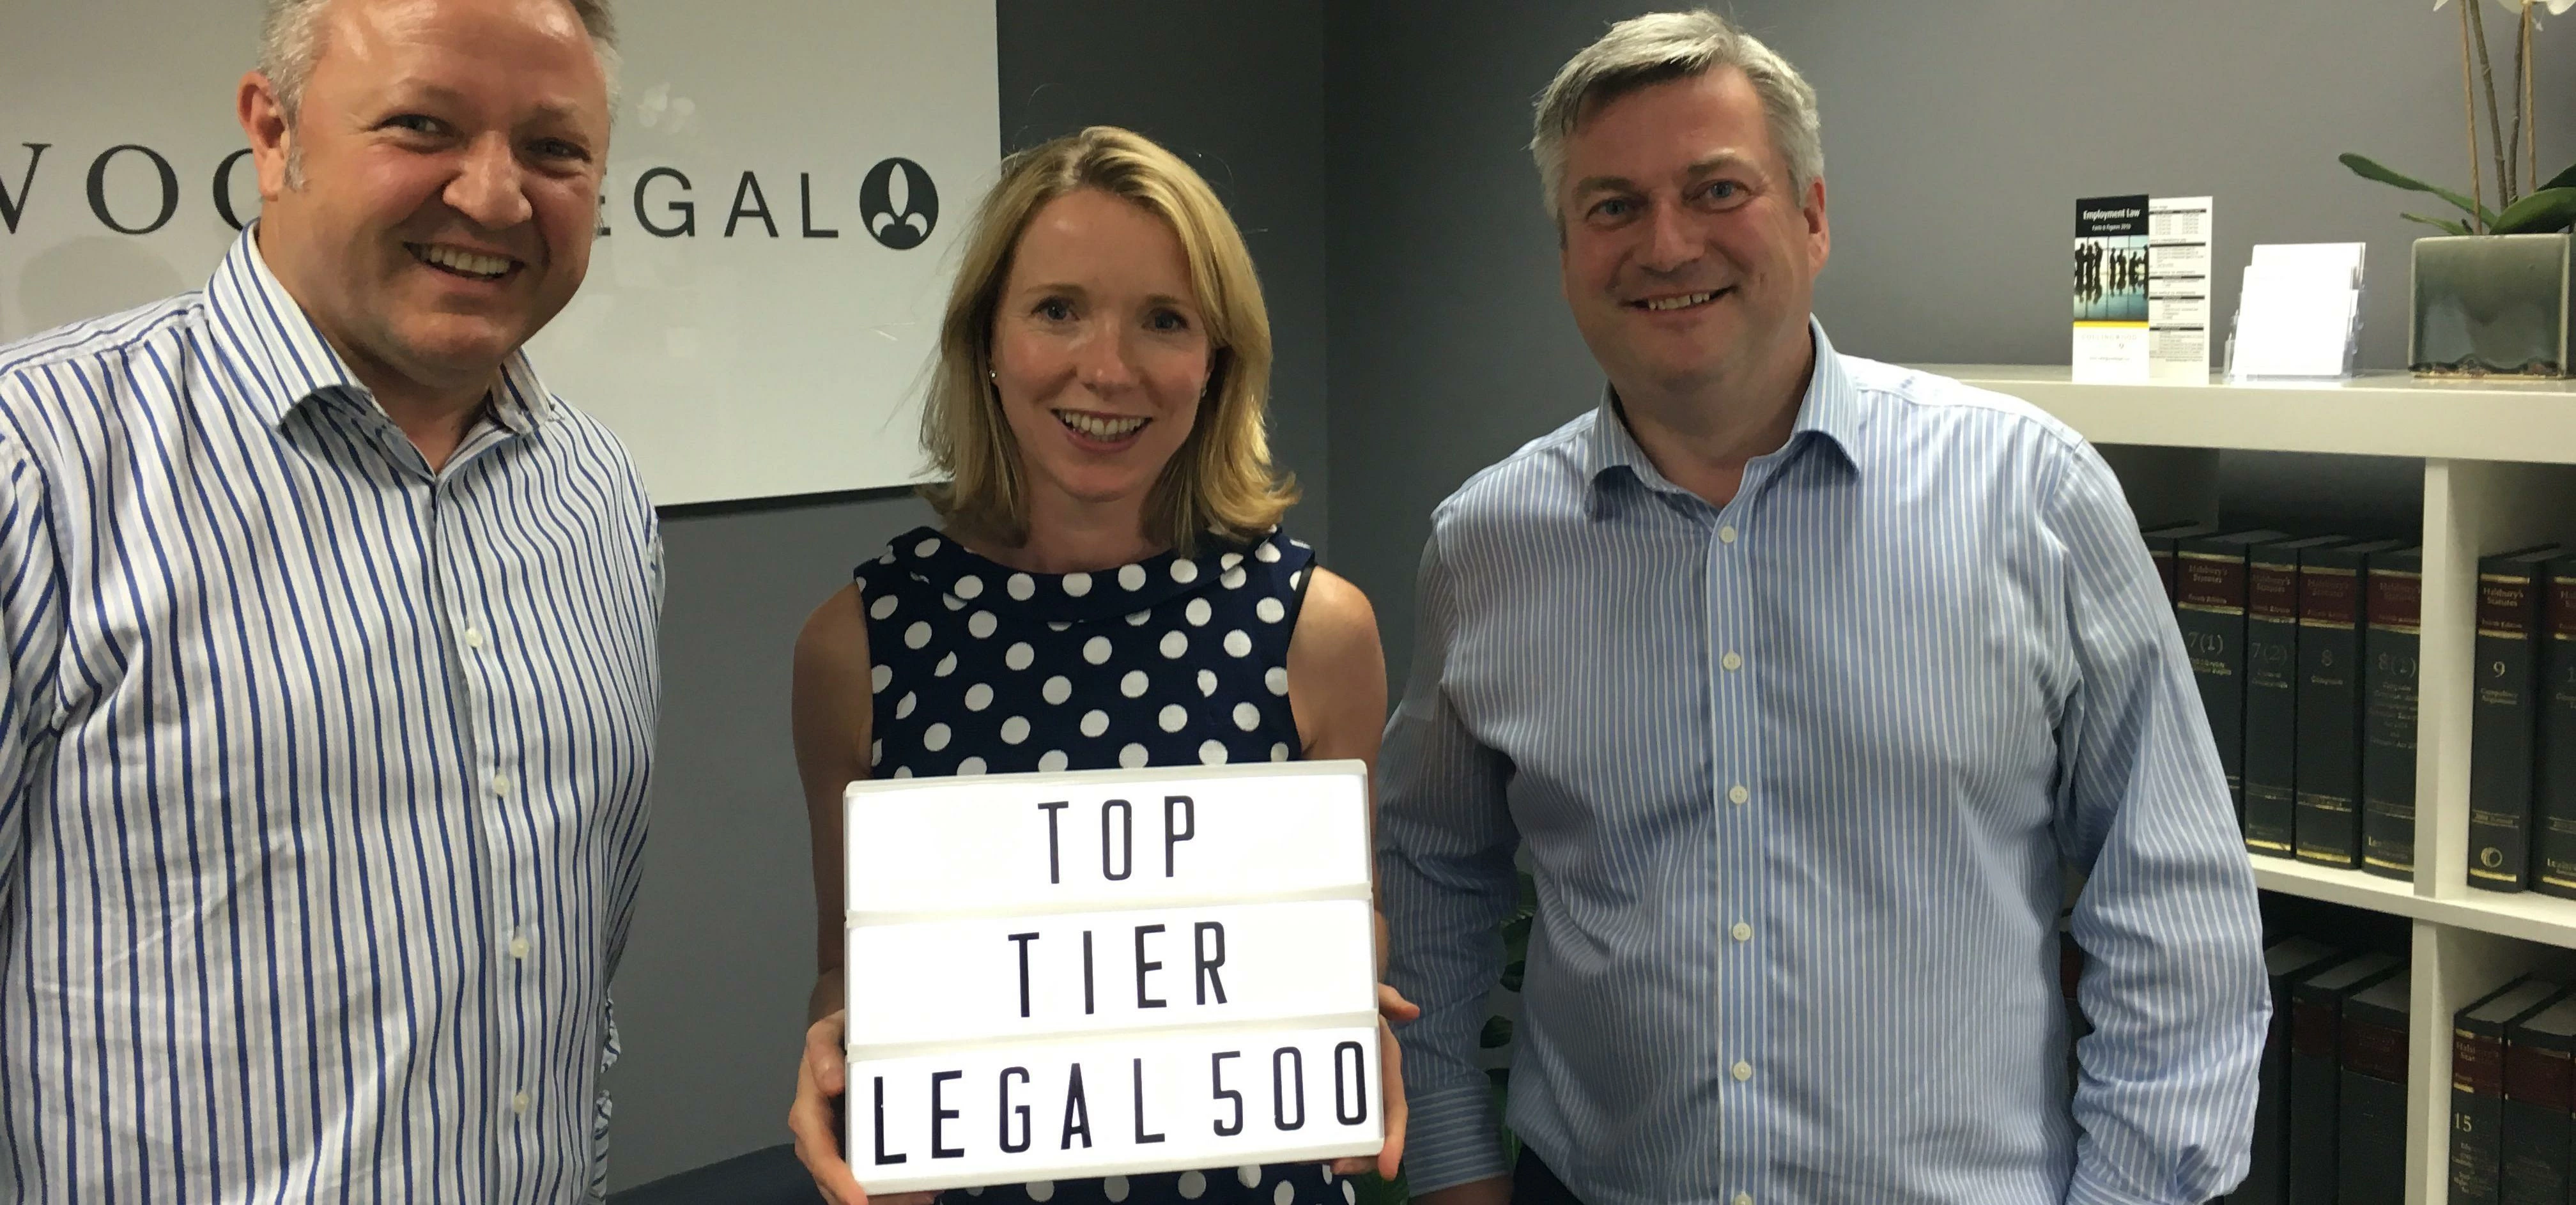 Top Tier: Left to right Collingwood Legal's Paul Johnstone, Sarah Fitzpatrick and Paul McGowan